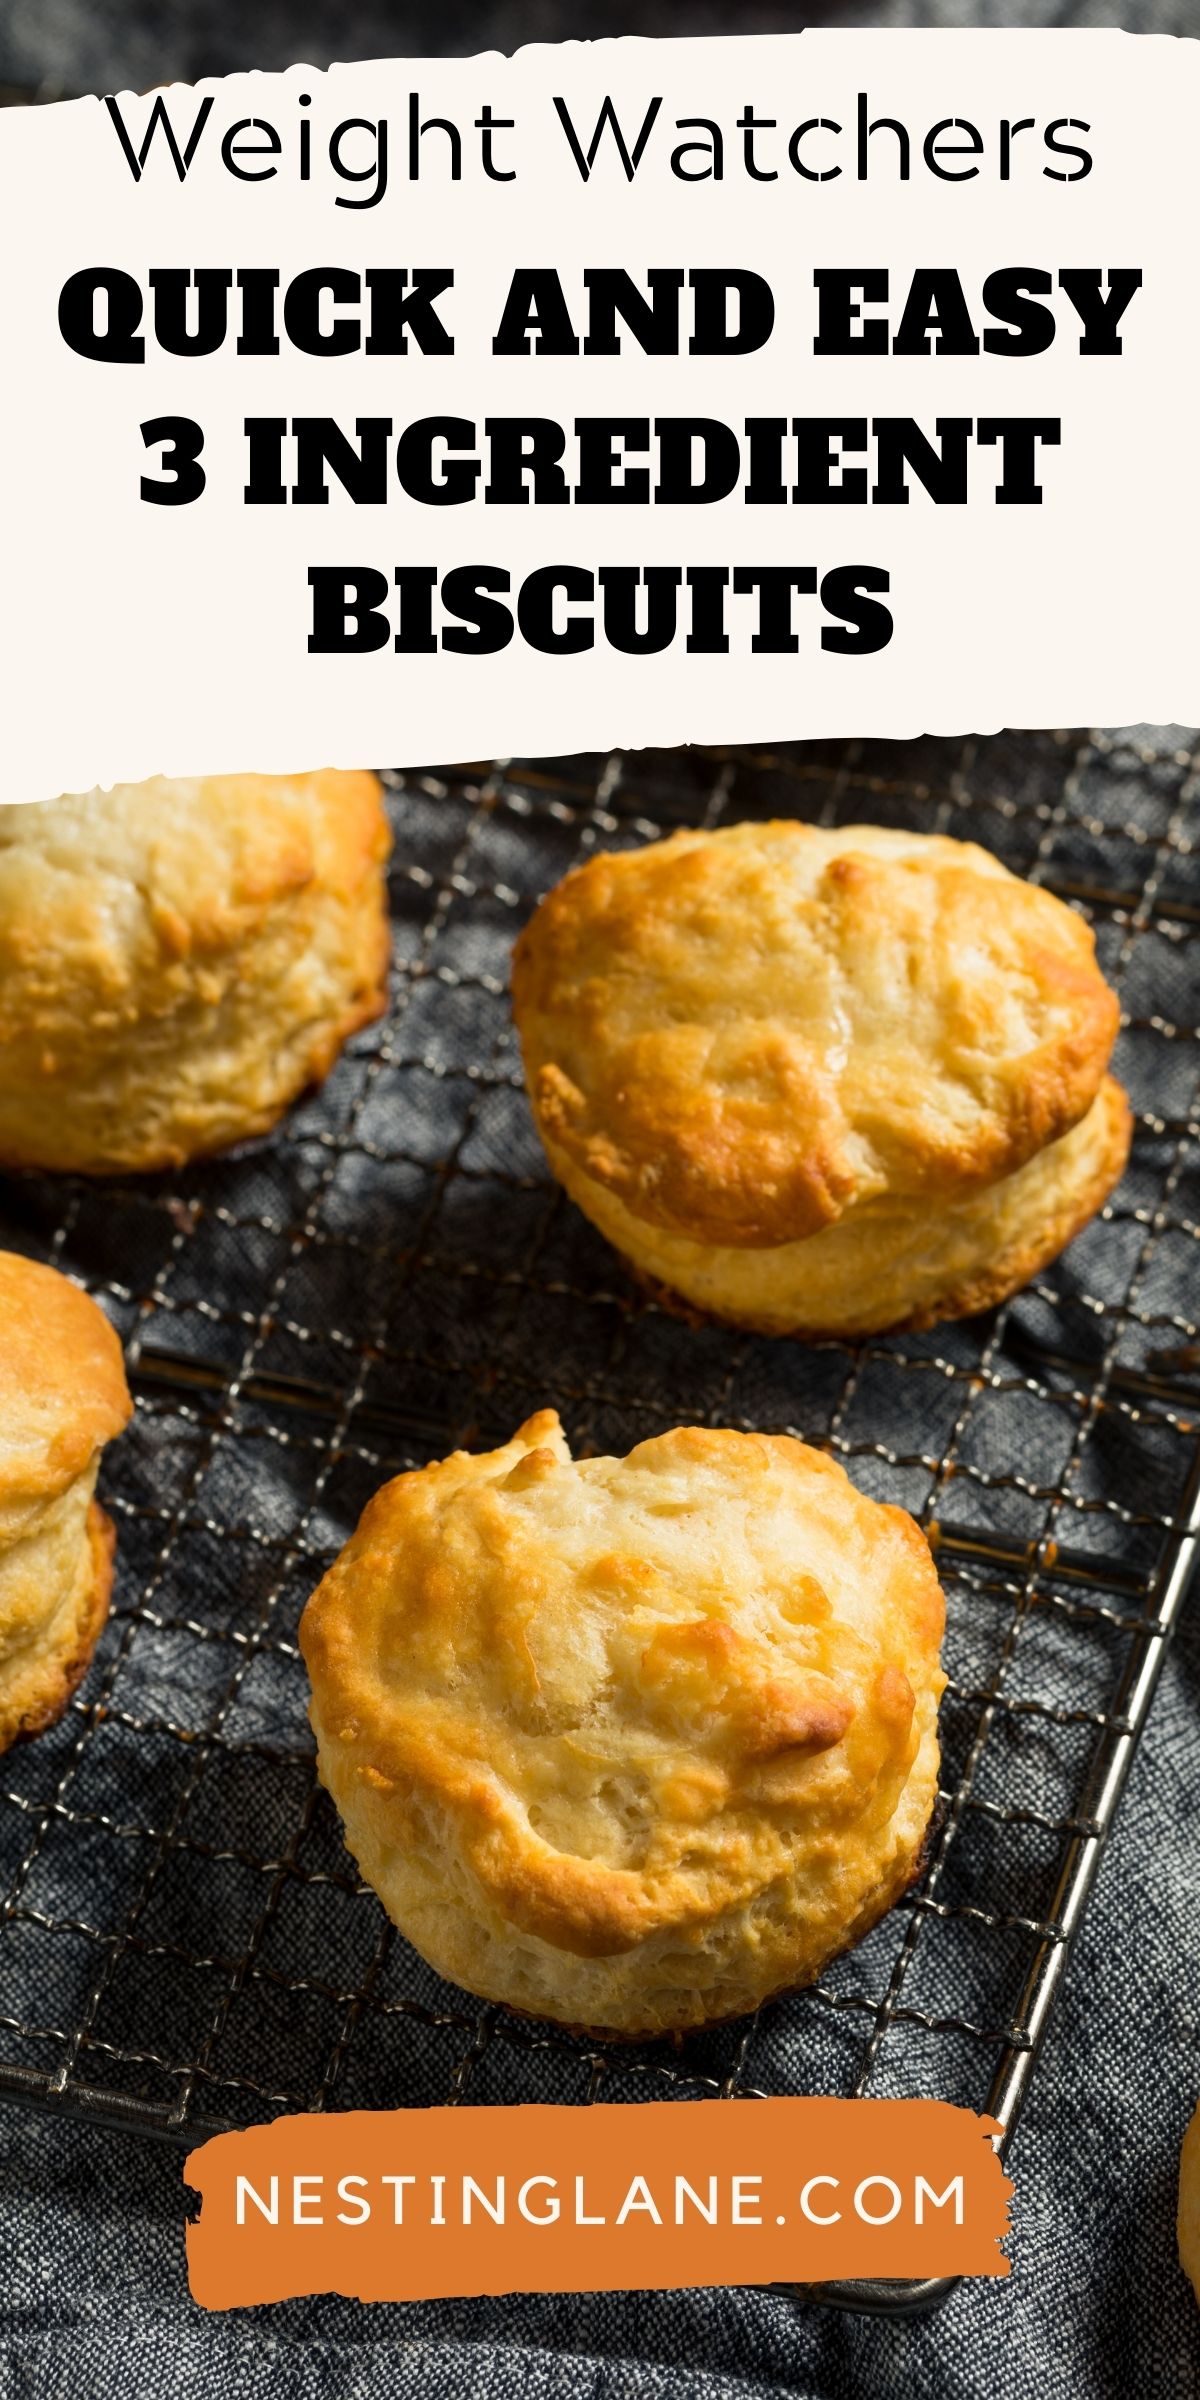 Graphic for Pinterest of Quick and Easy 3 Ingredient Biscuits Recipe.